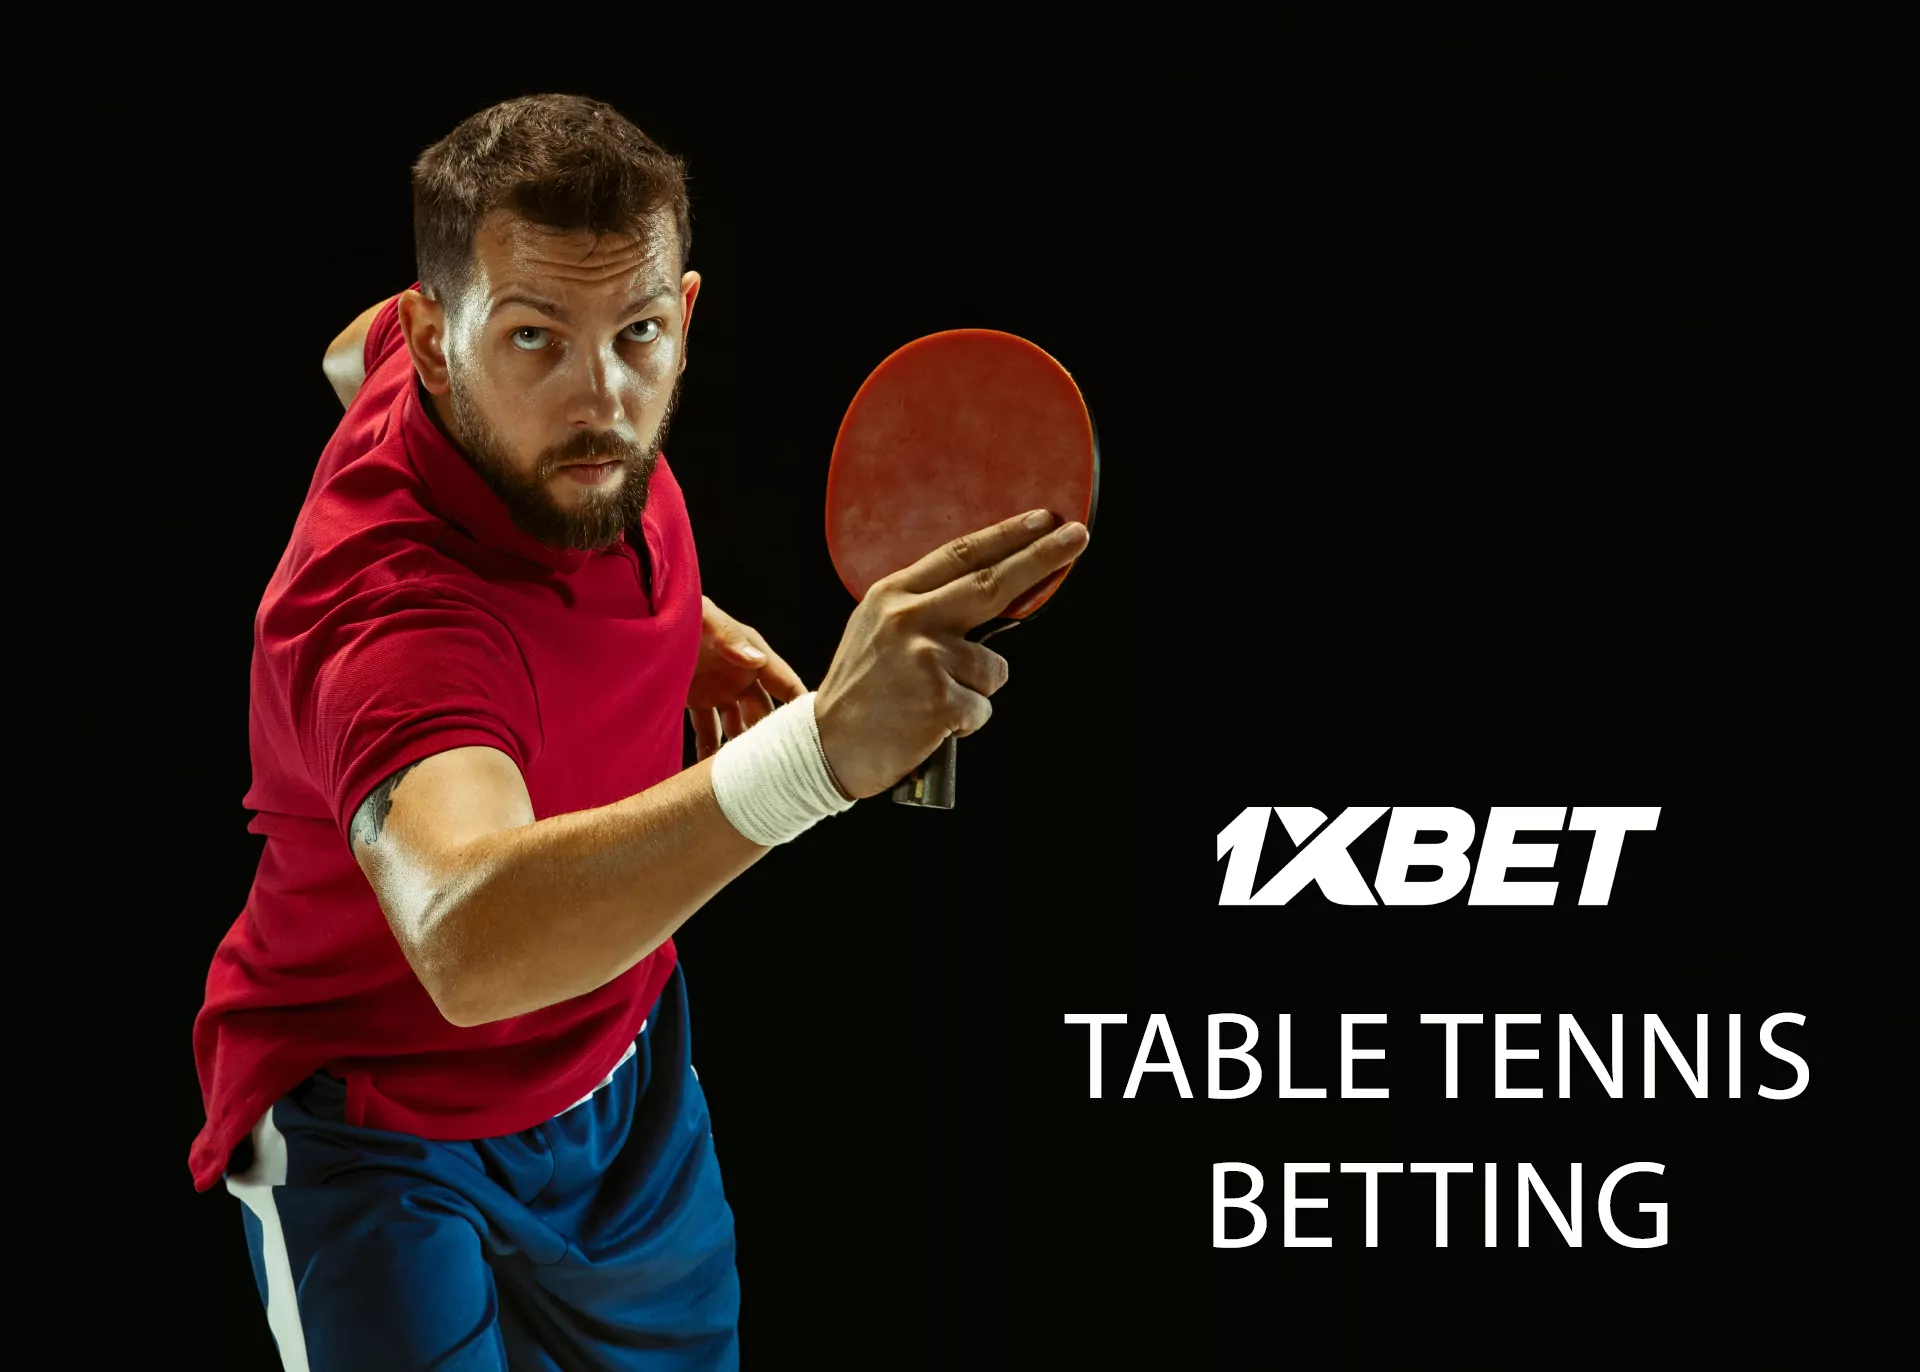 You can bet on table tennis matches on the website and in the app 1xBet.